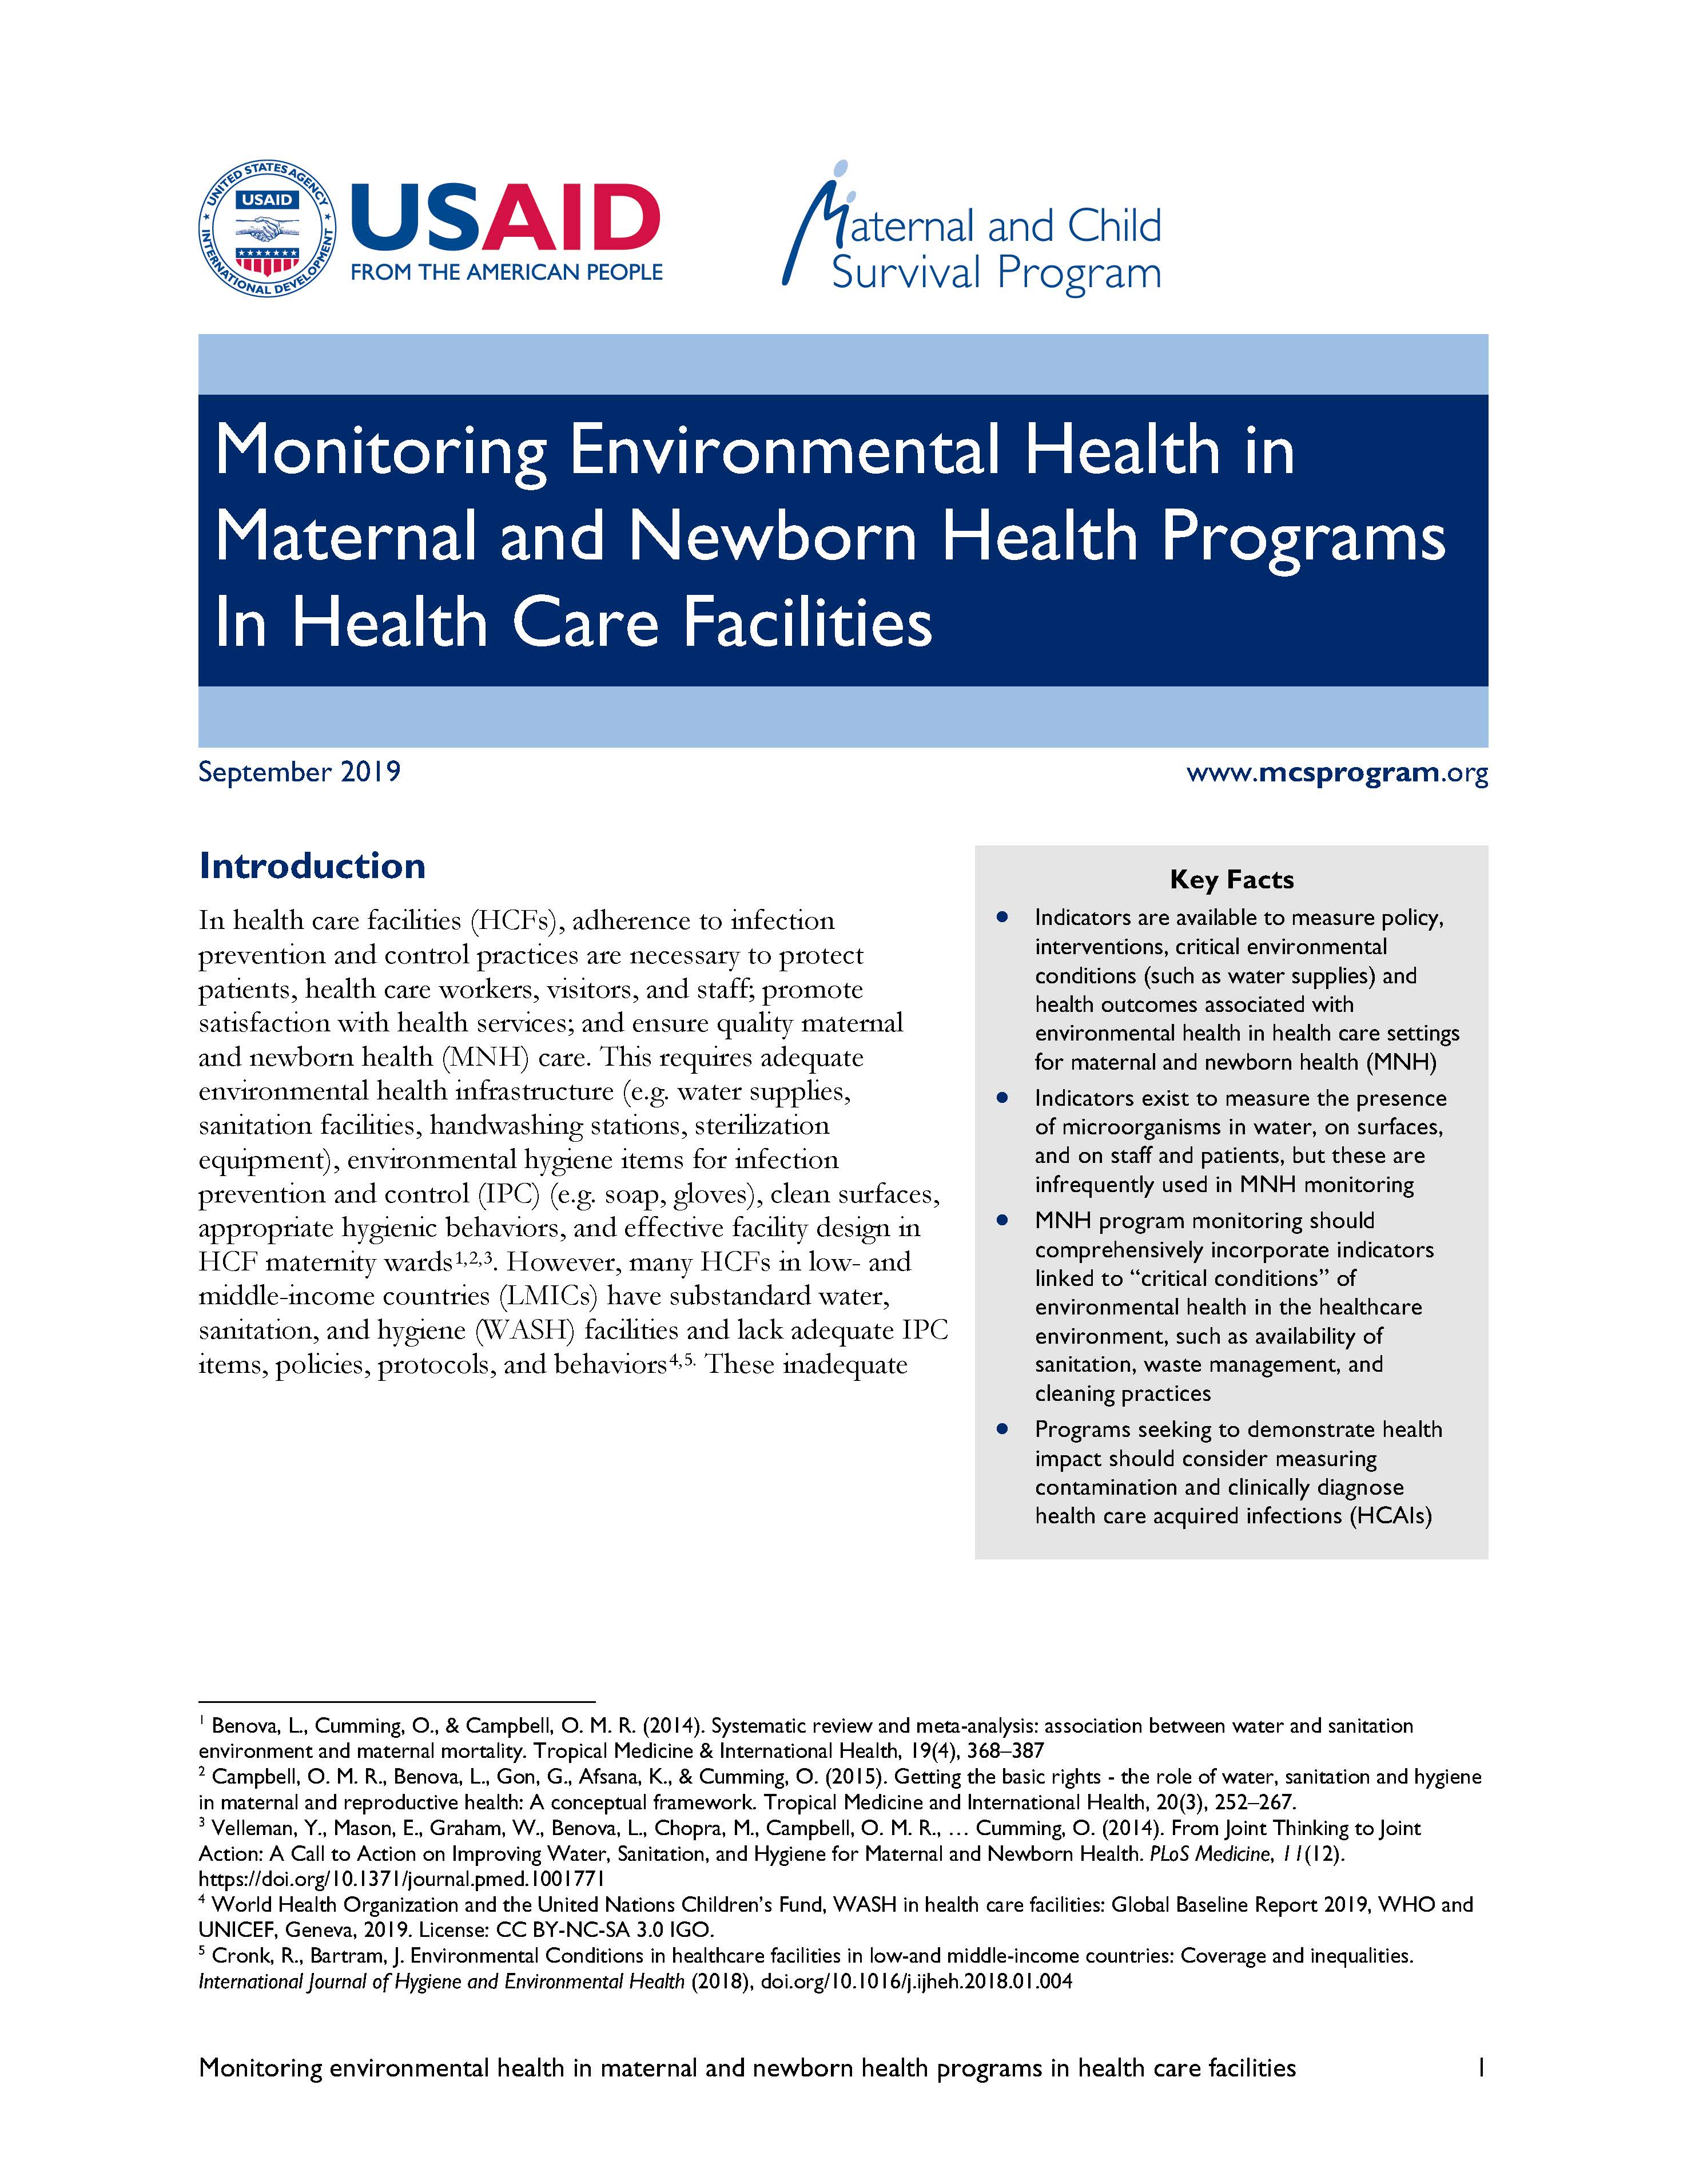 'Monitoring Environmental Health in Maternal and Newborn Health Programs In Health Care Facilities' cover